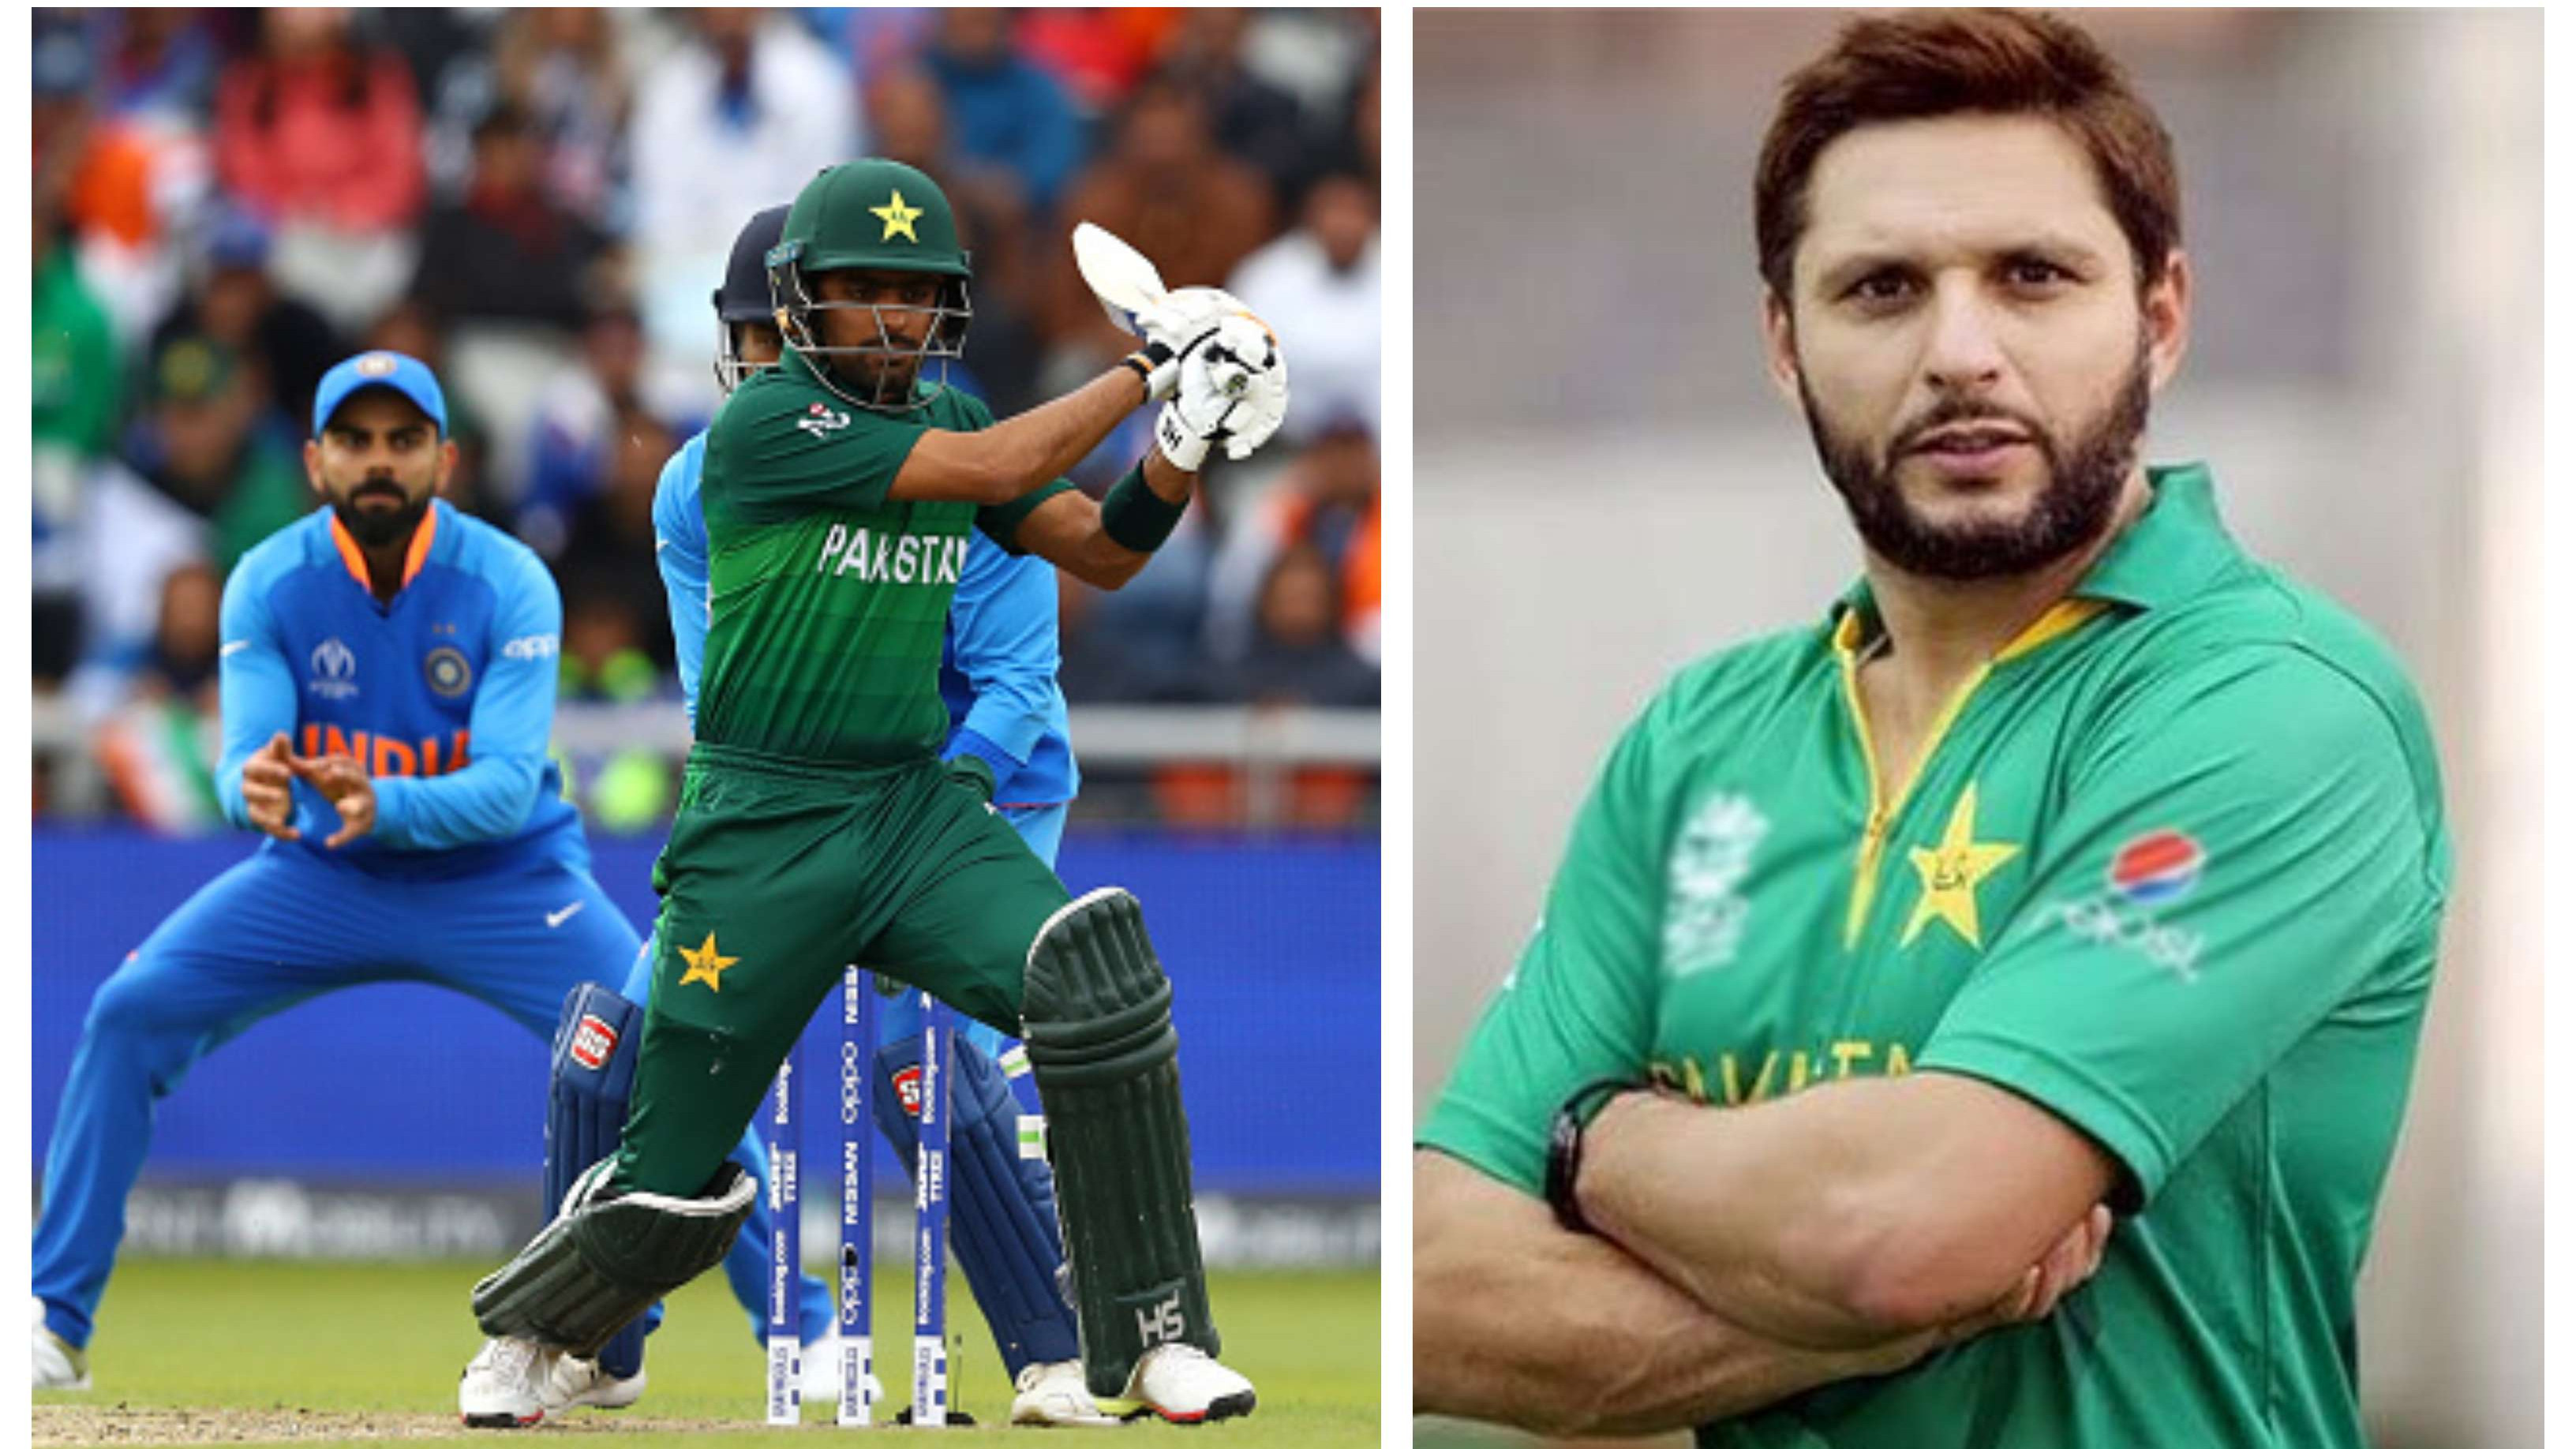 Cricket can improve relations between India and Pakistan, says Shahid Afridi